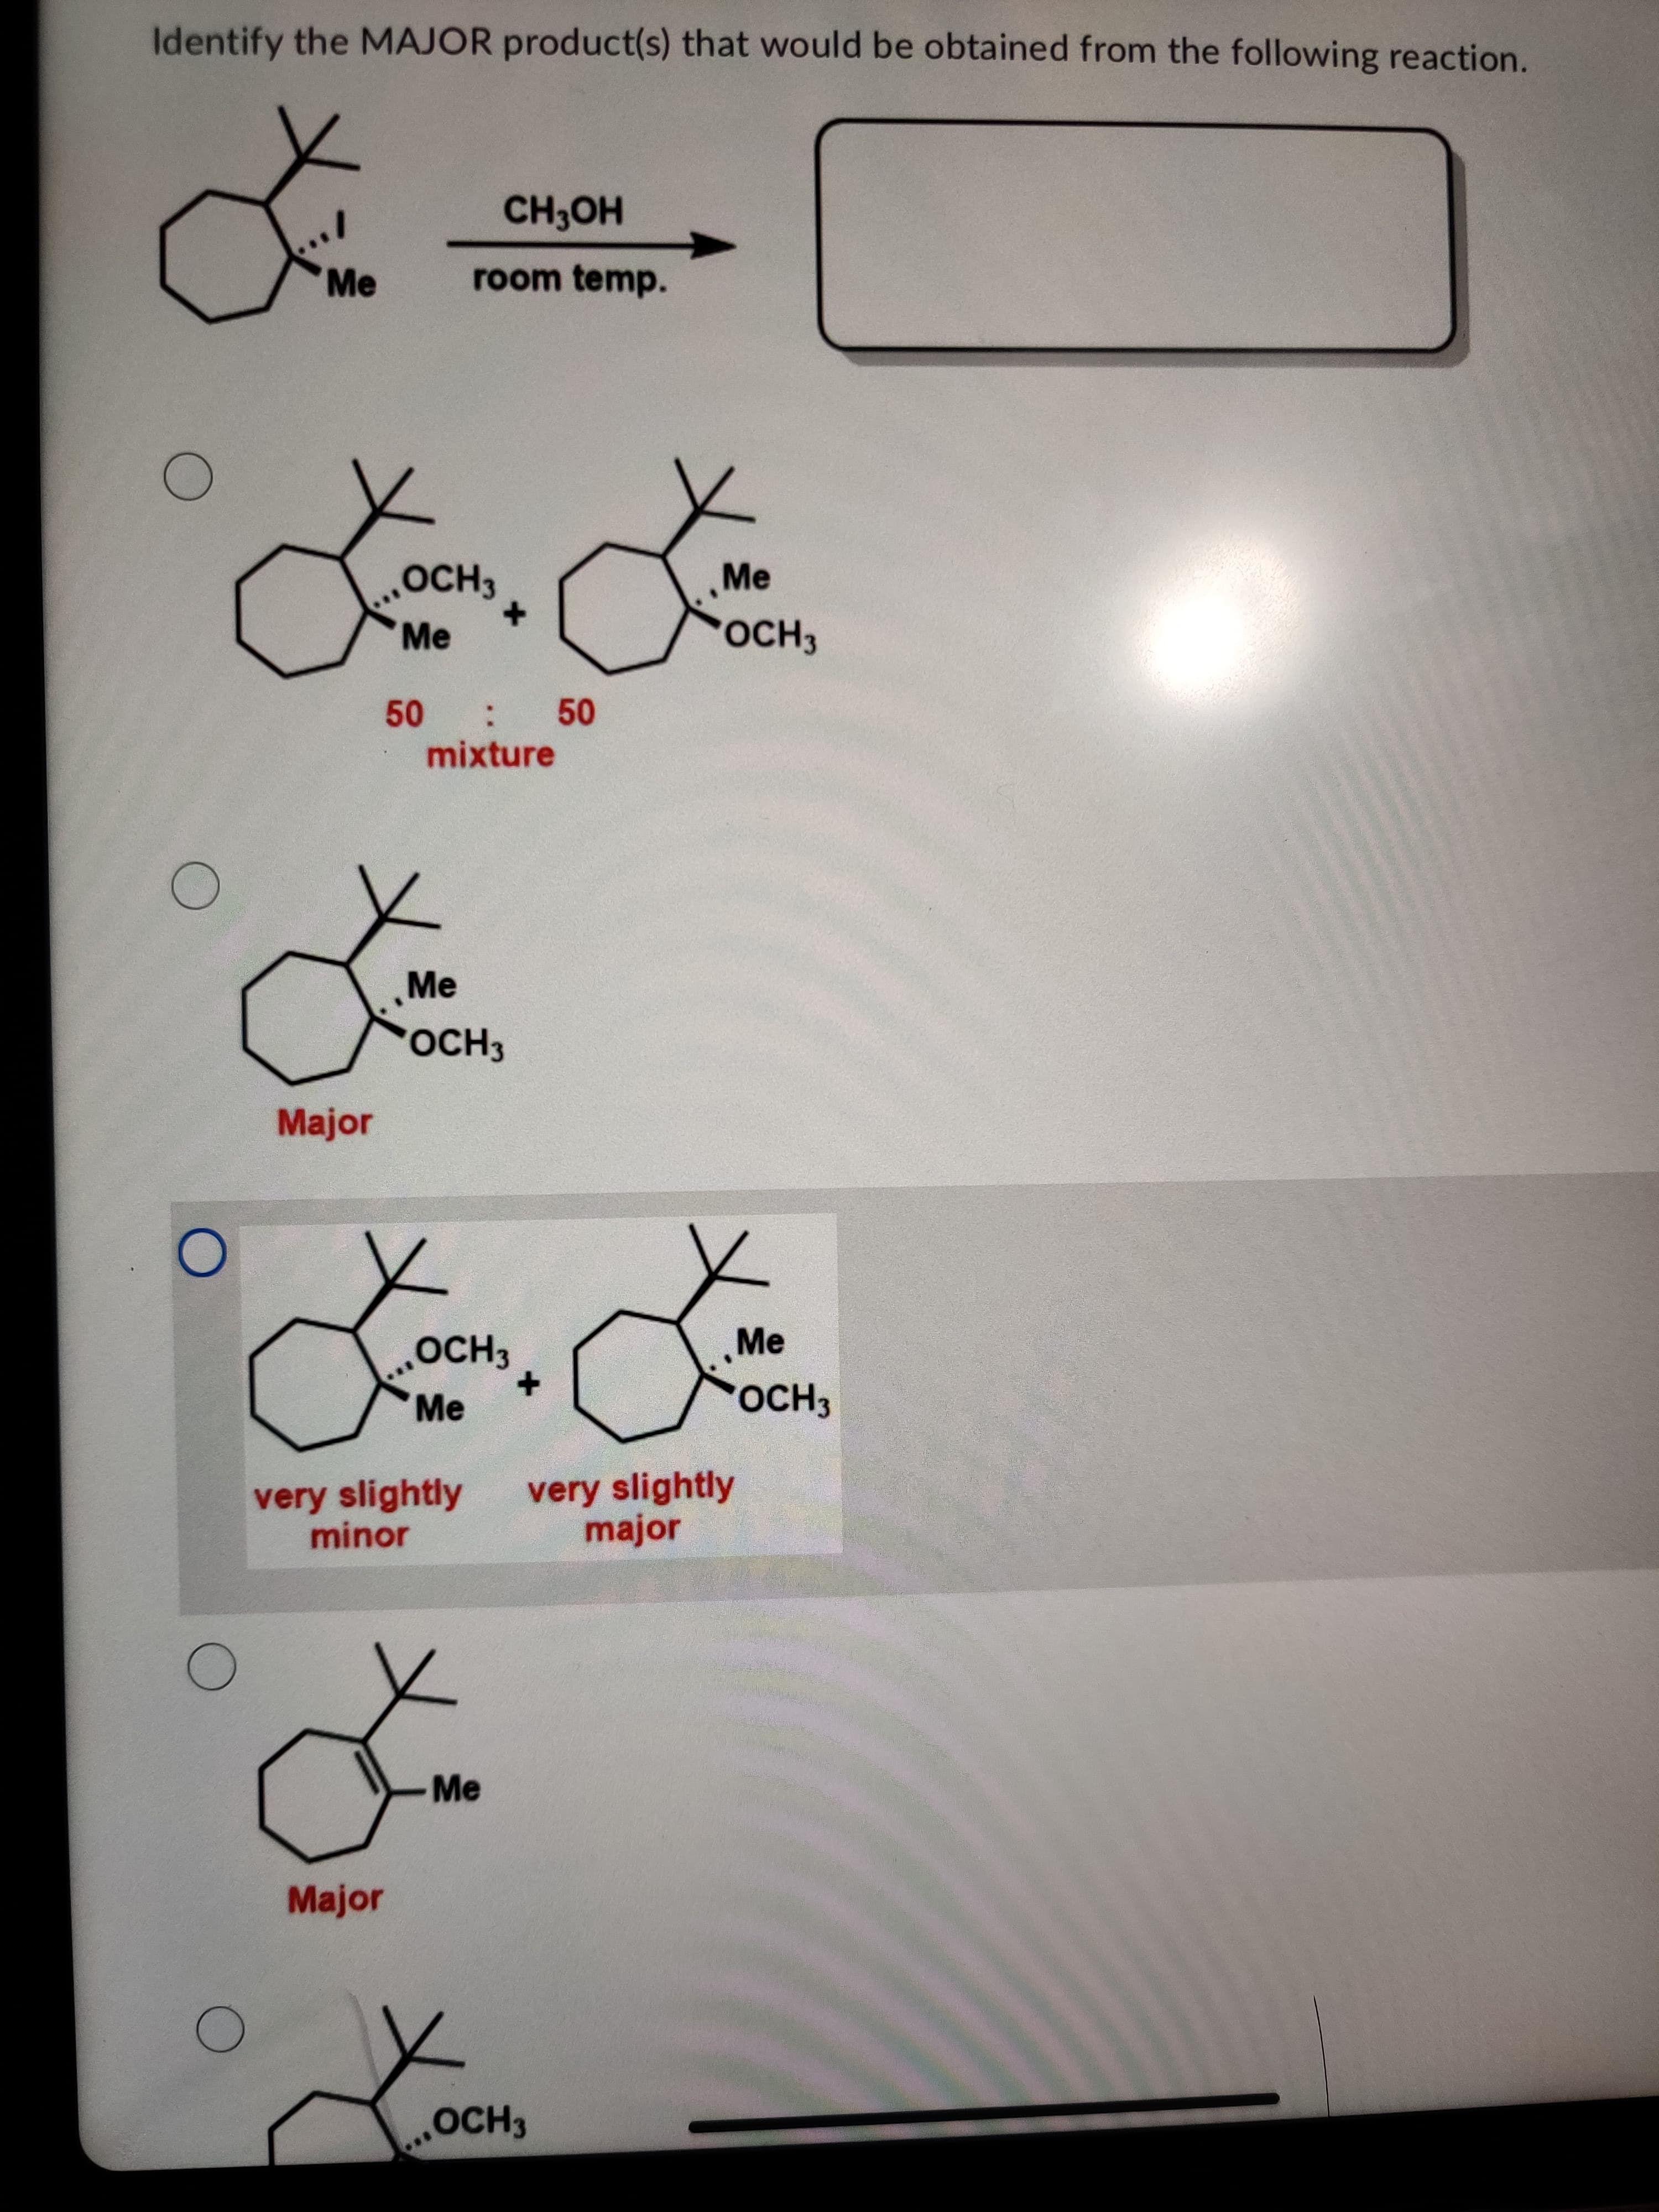 50
Identify the MAJOR product(s) that would be obtained from the following reaction.
HO HO
room temp.
Me
OCH3
Me
Me
OCH3
mixture
Me
OCH3
Major
OCH3
„Me
Me
OCH3
very slightly
minor
very slightly
major
Me
Major
OCH3
